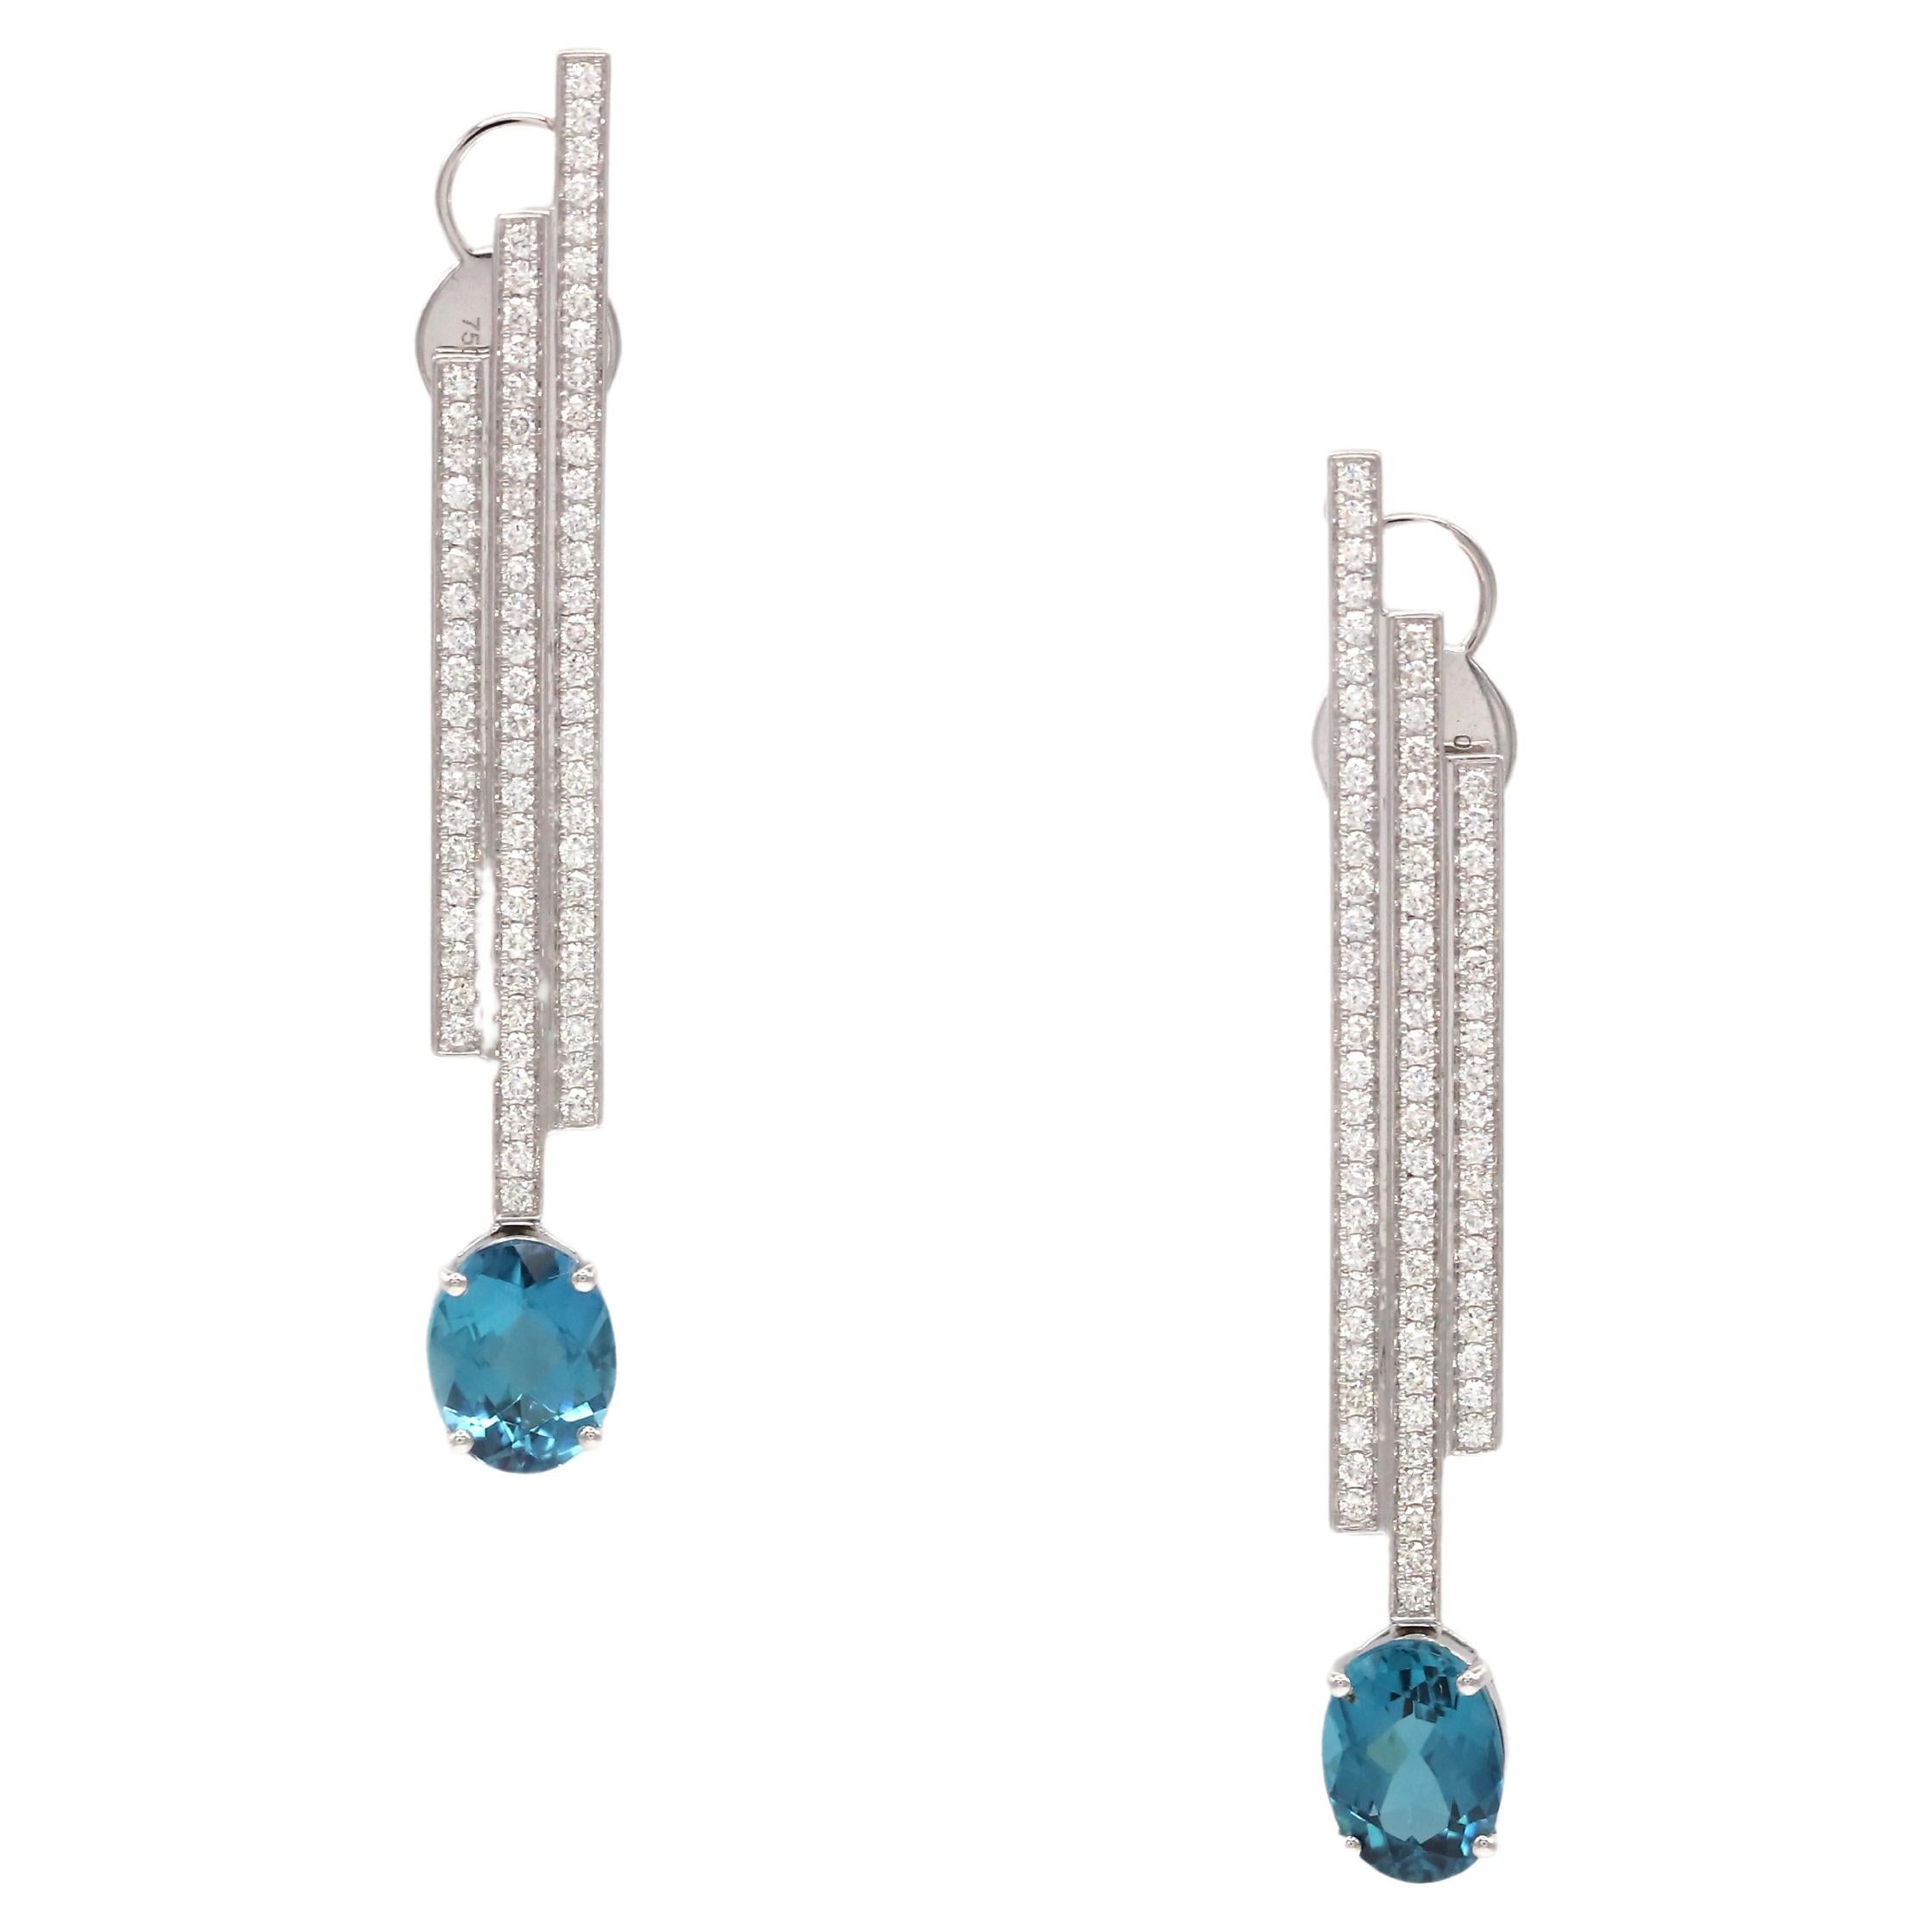 Classic Tourmaline Diamond 18K White Gold Exclusive Earrings For Her For Sale